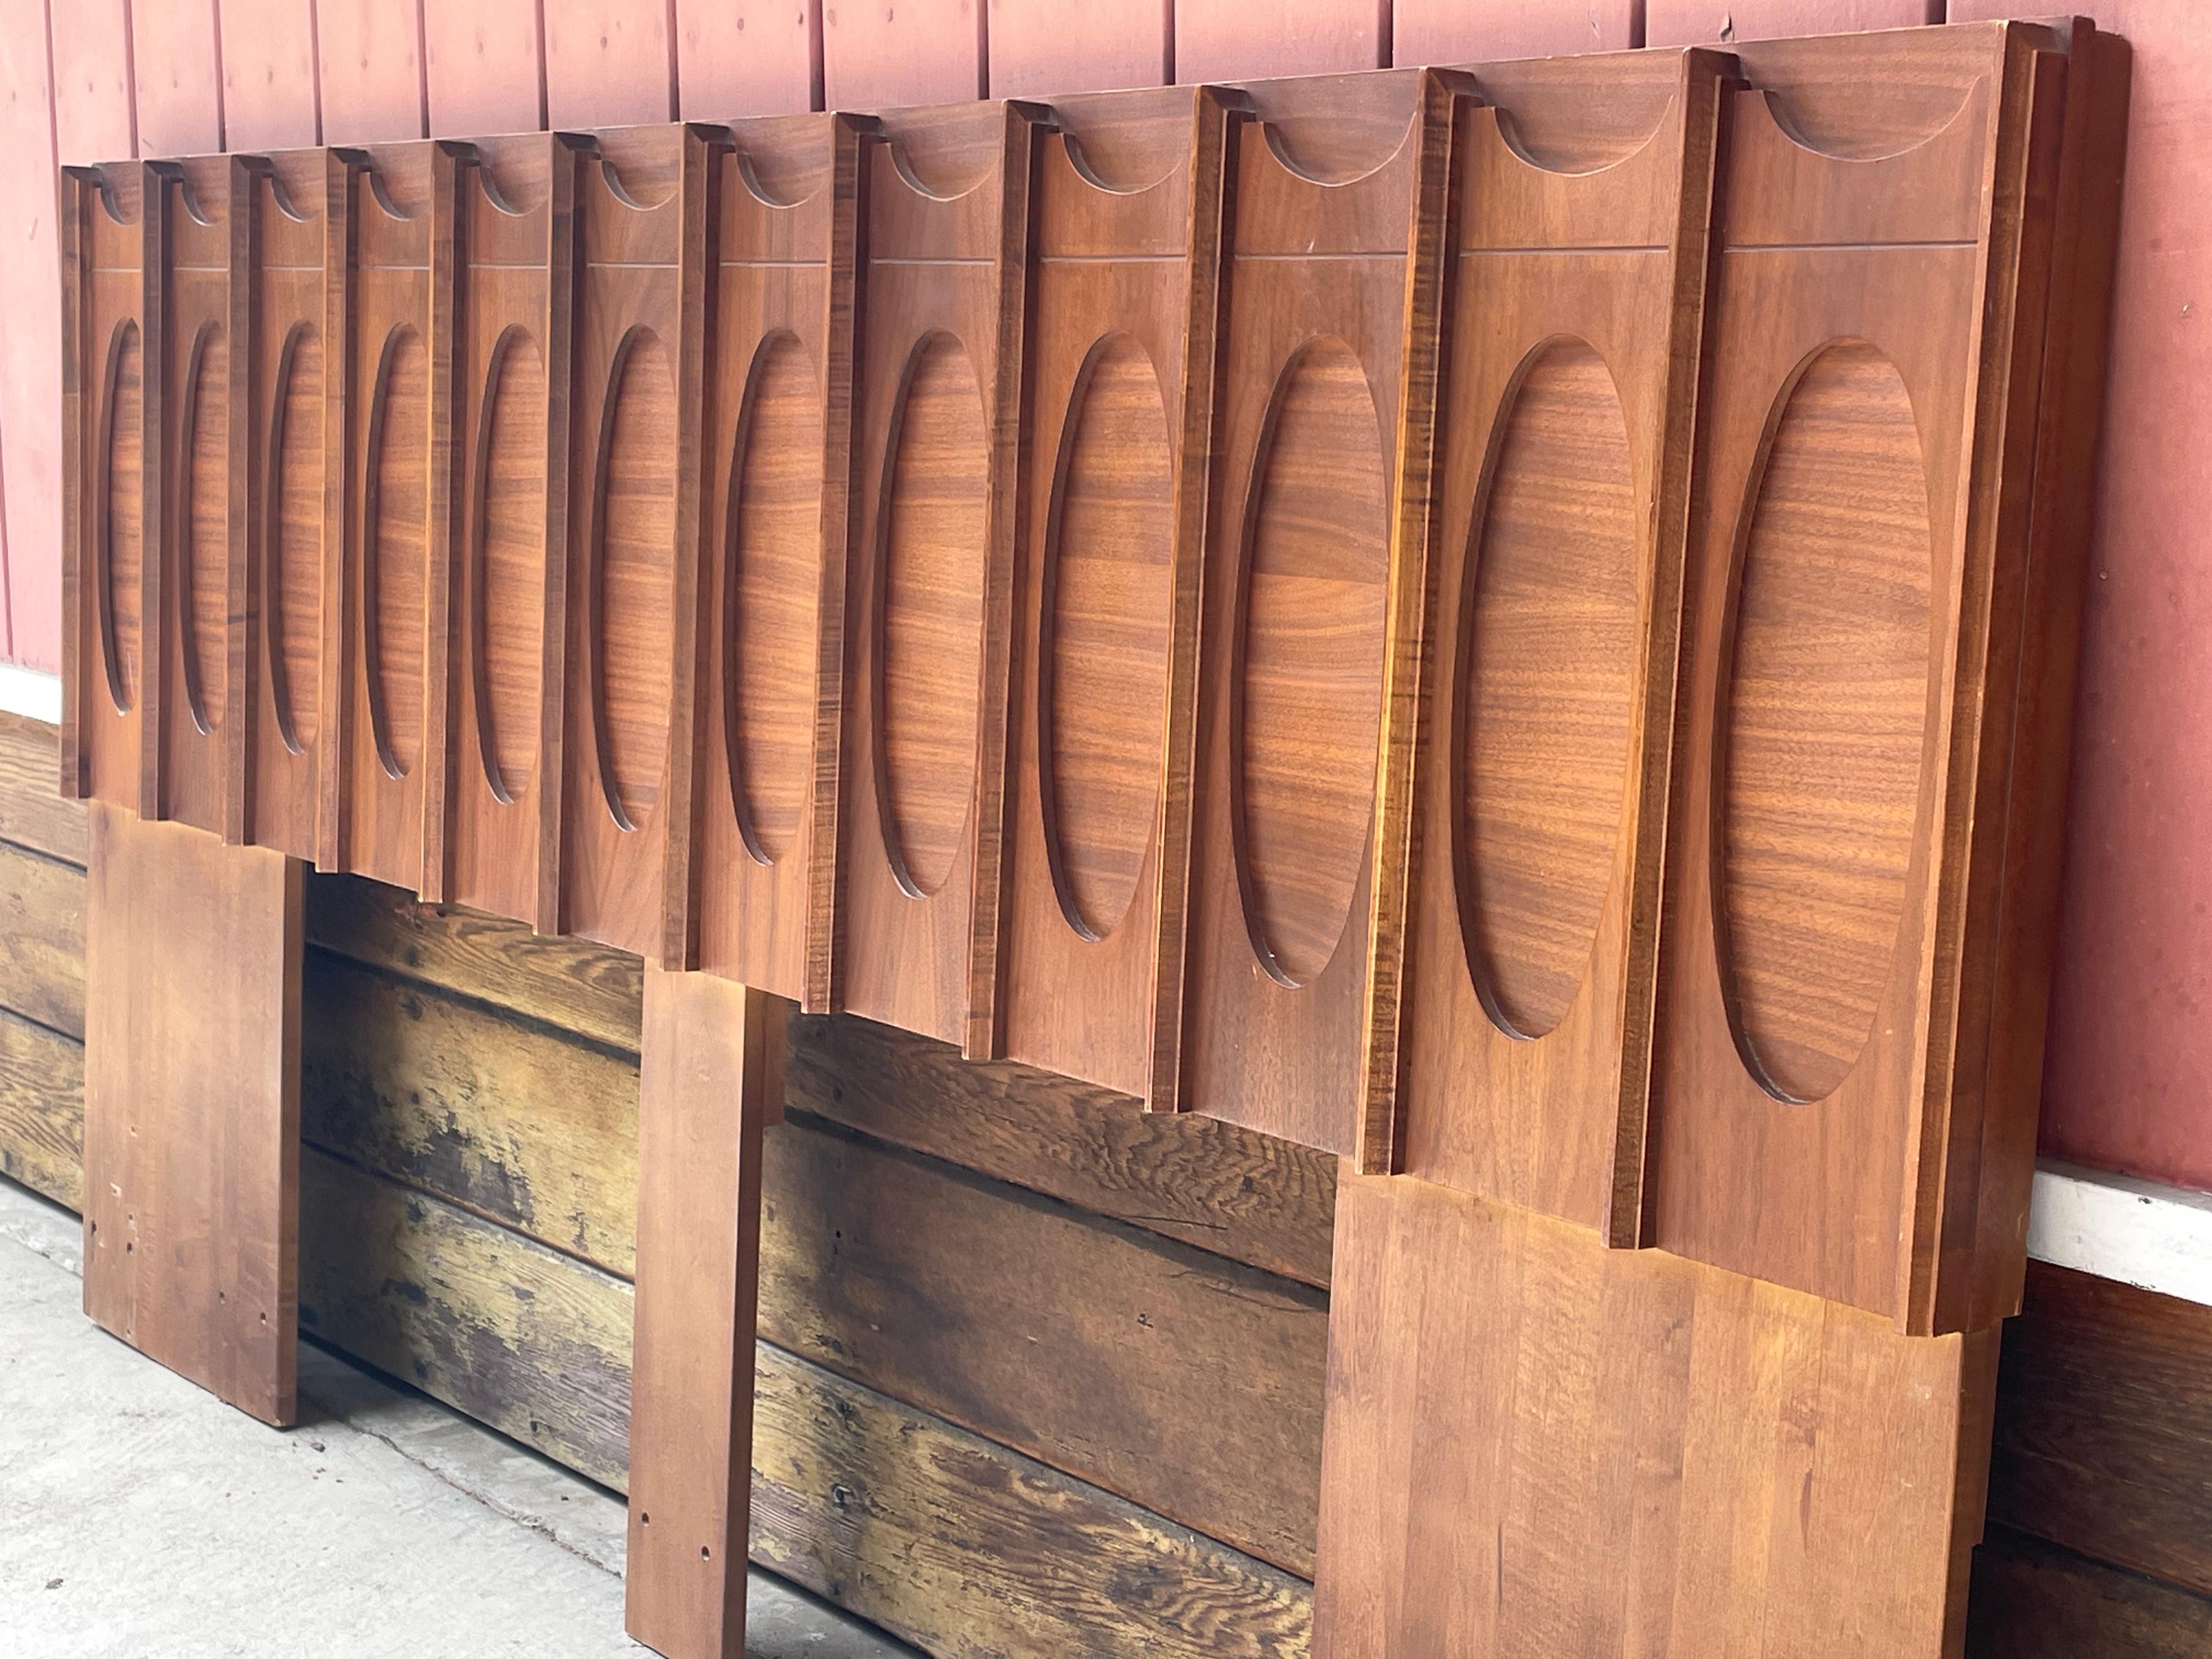 Paul Evans style brutalist headboard by Tobago, Circa 1970s. Rare find.

DIMENSIONS: 80ʺW x 41ʺH x 3.25'

Condition: Very good vintage condition with minor scratches and flaws consistent with age. See photos. Shows very well.

We currently have this